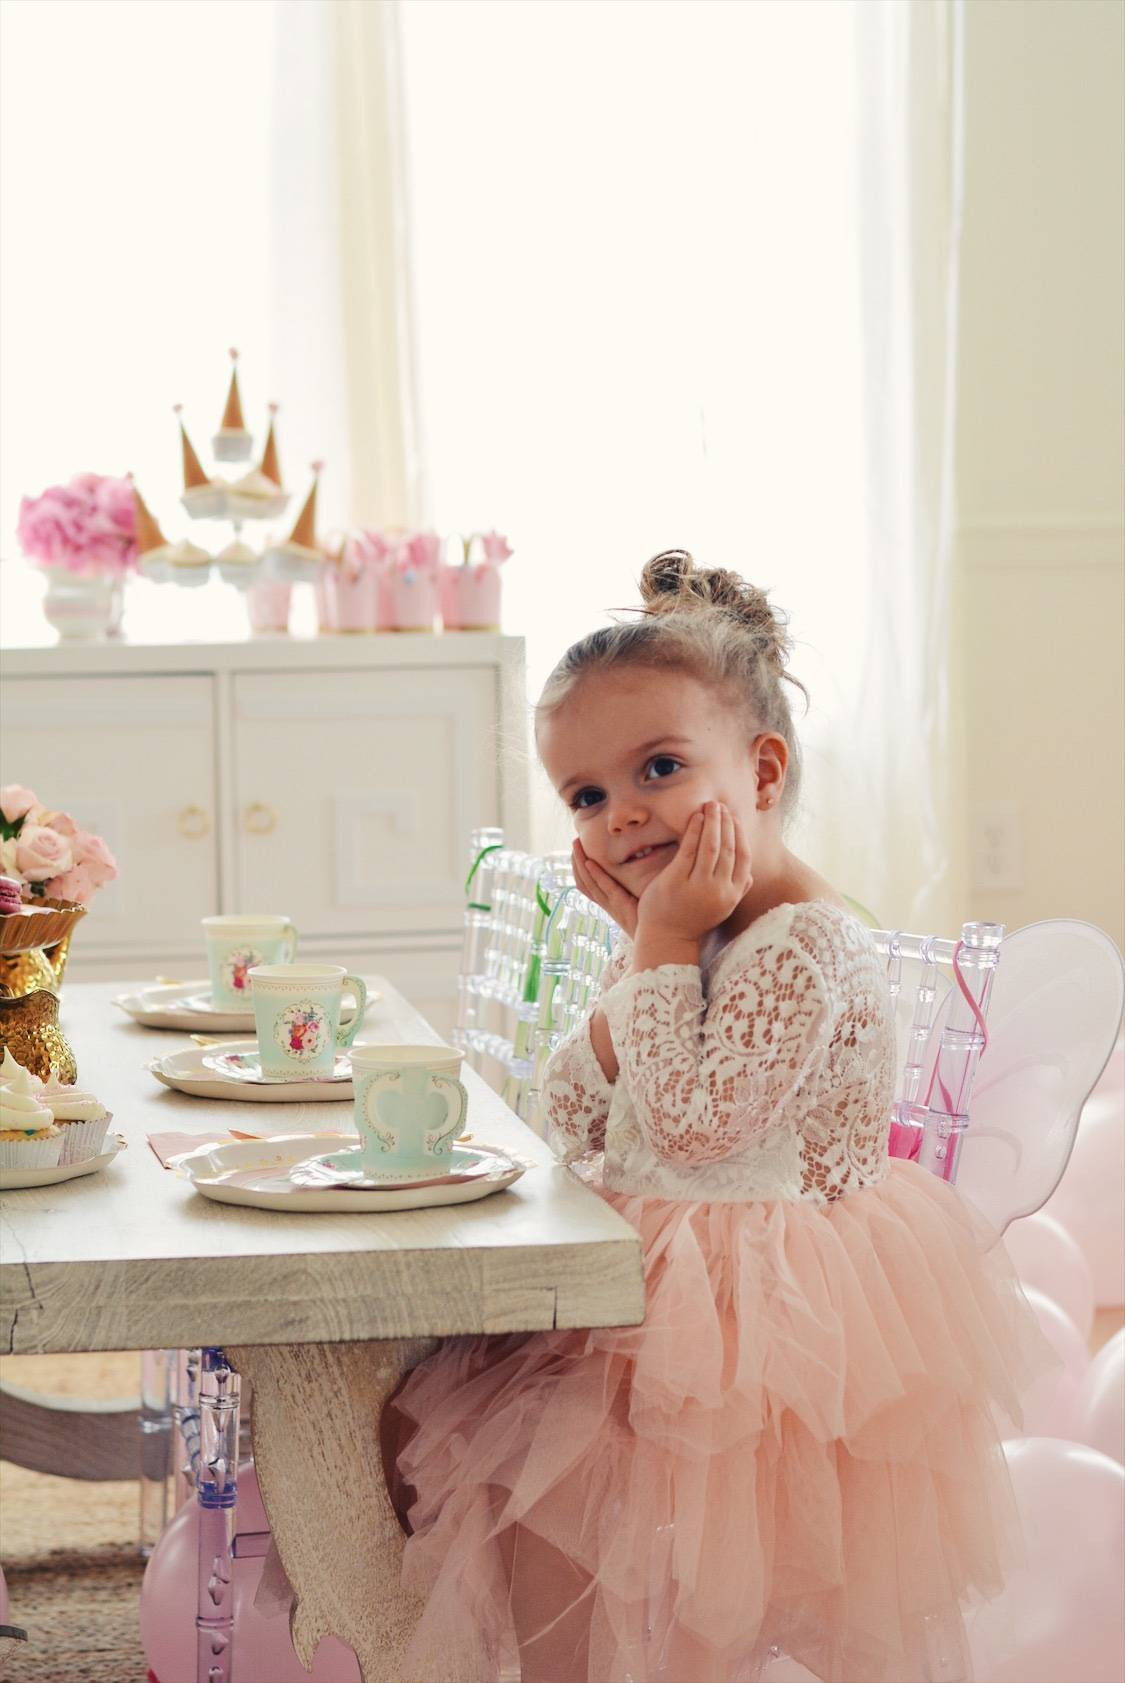 Toddler Birthday Party Ideas 3 Year Old
 Tea Party Ideas A Princess Tea Inspired Birthday for a 3